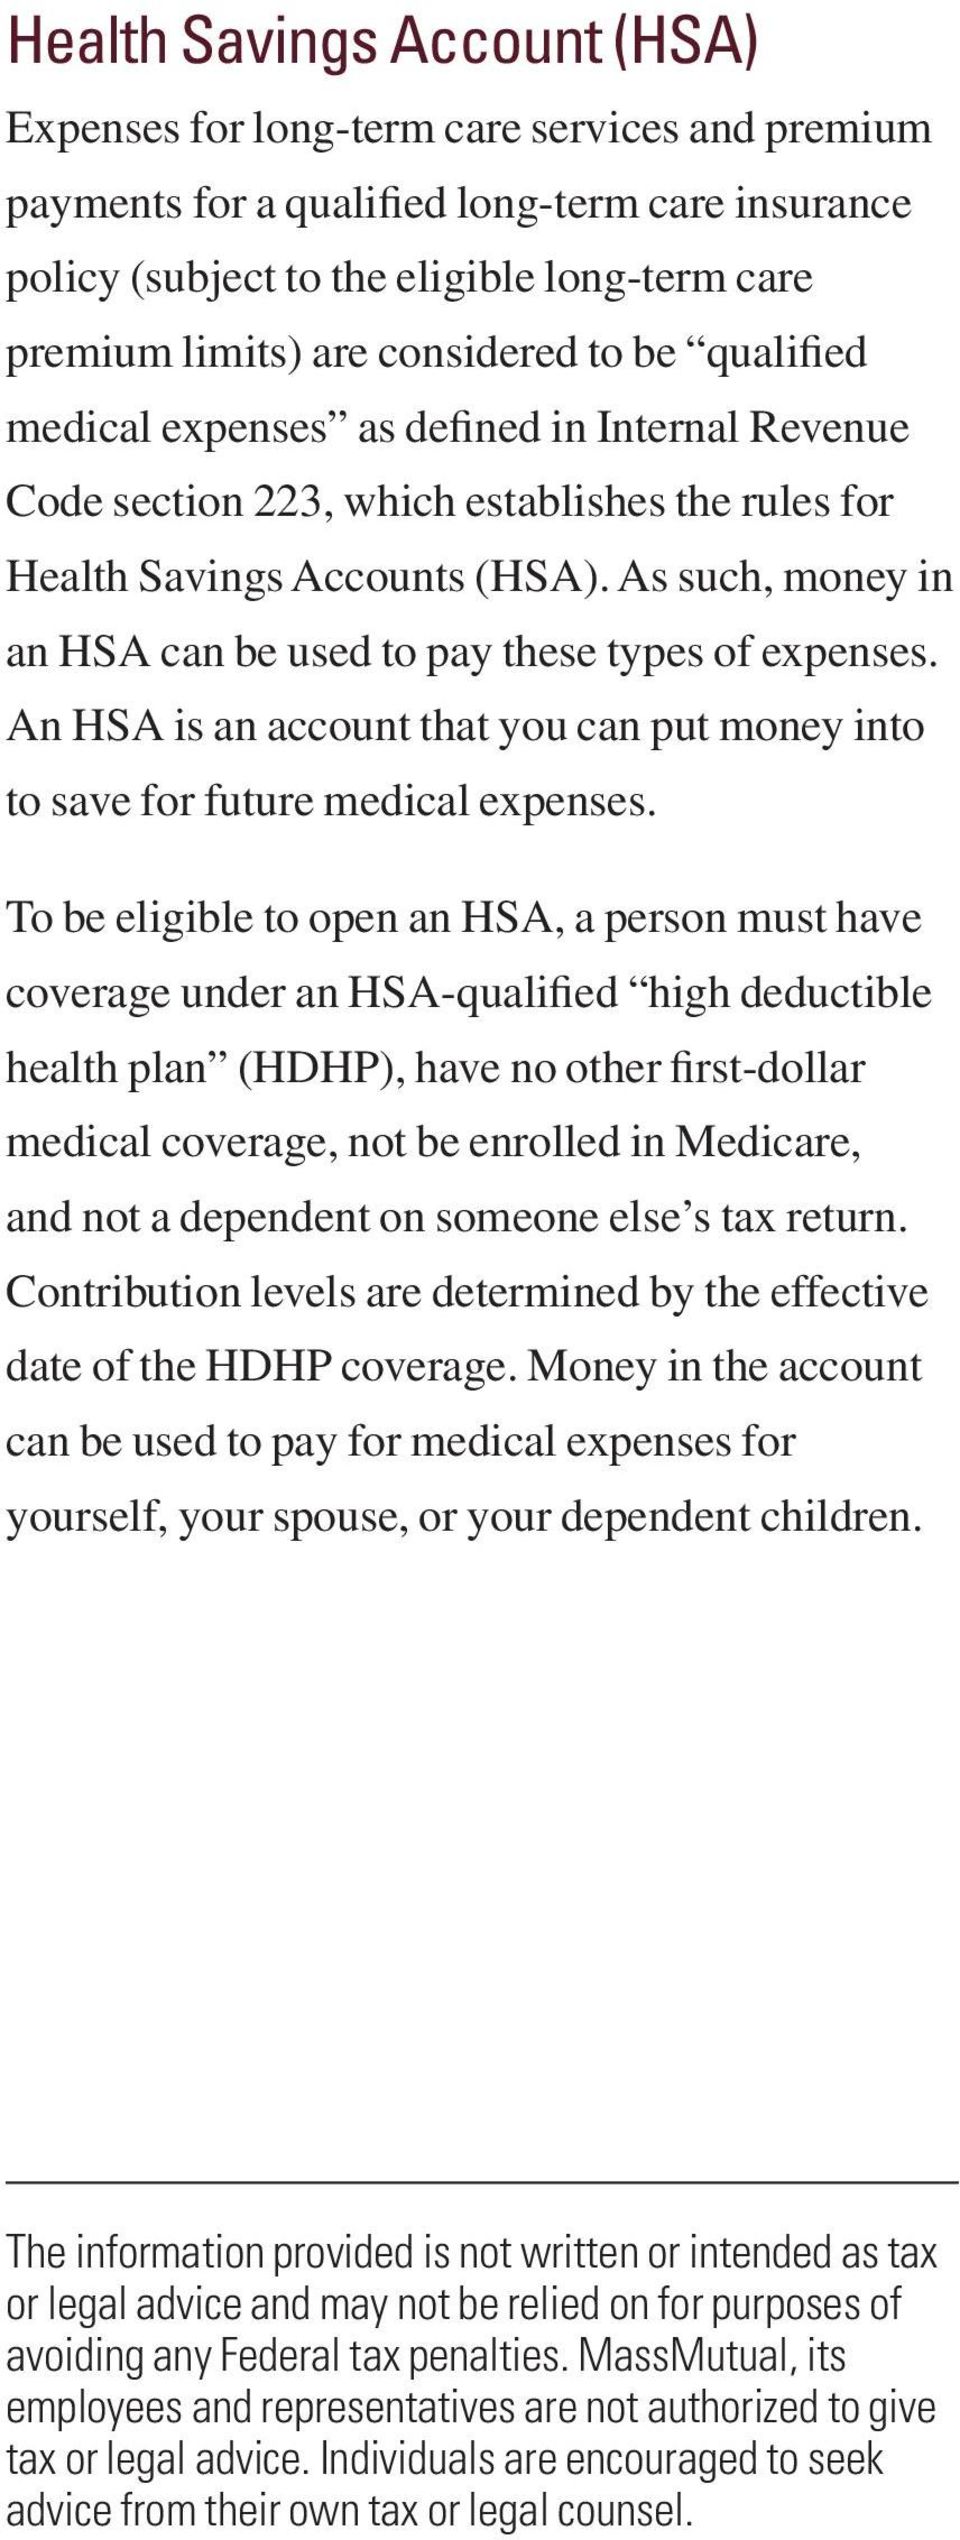 As such, money in an HSA can be used to pay these types of expenses. An HSA is an account that you can put money into to save for future medical expenses.